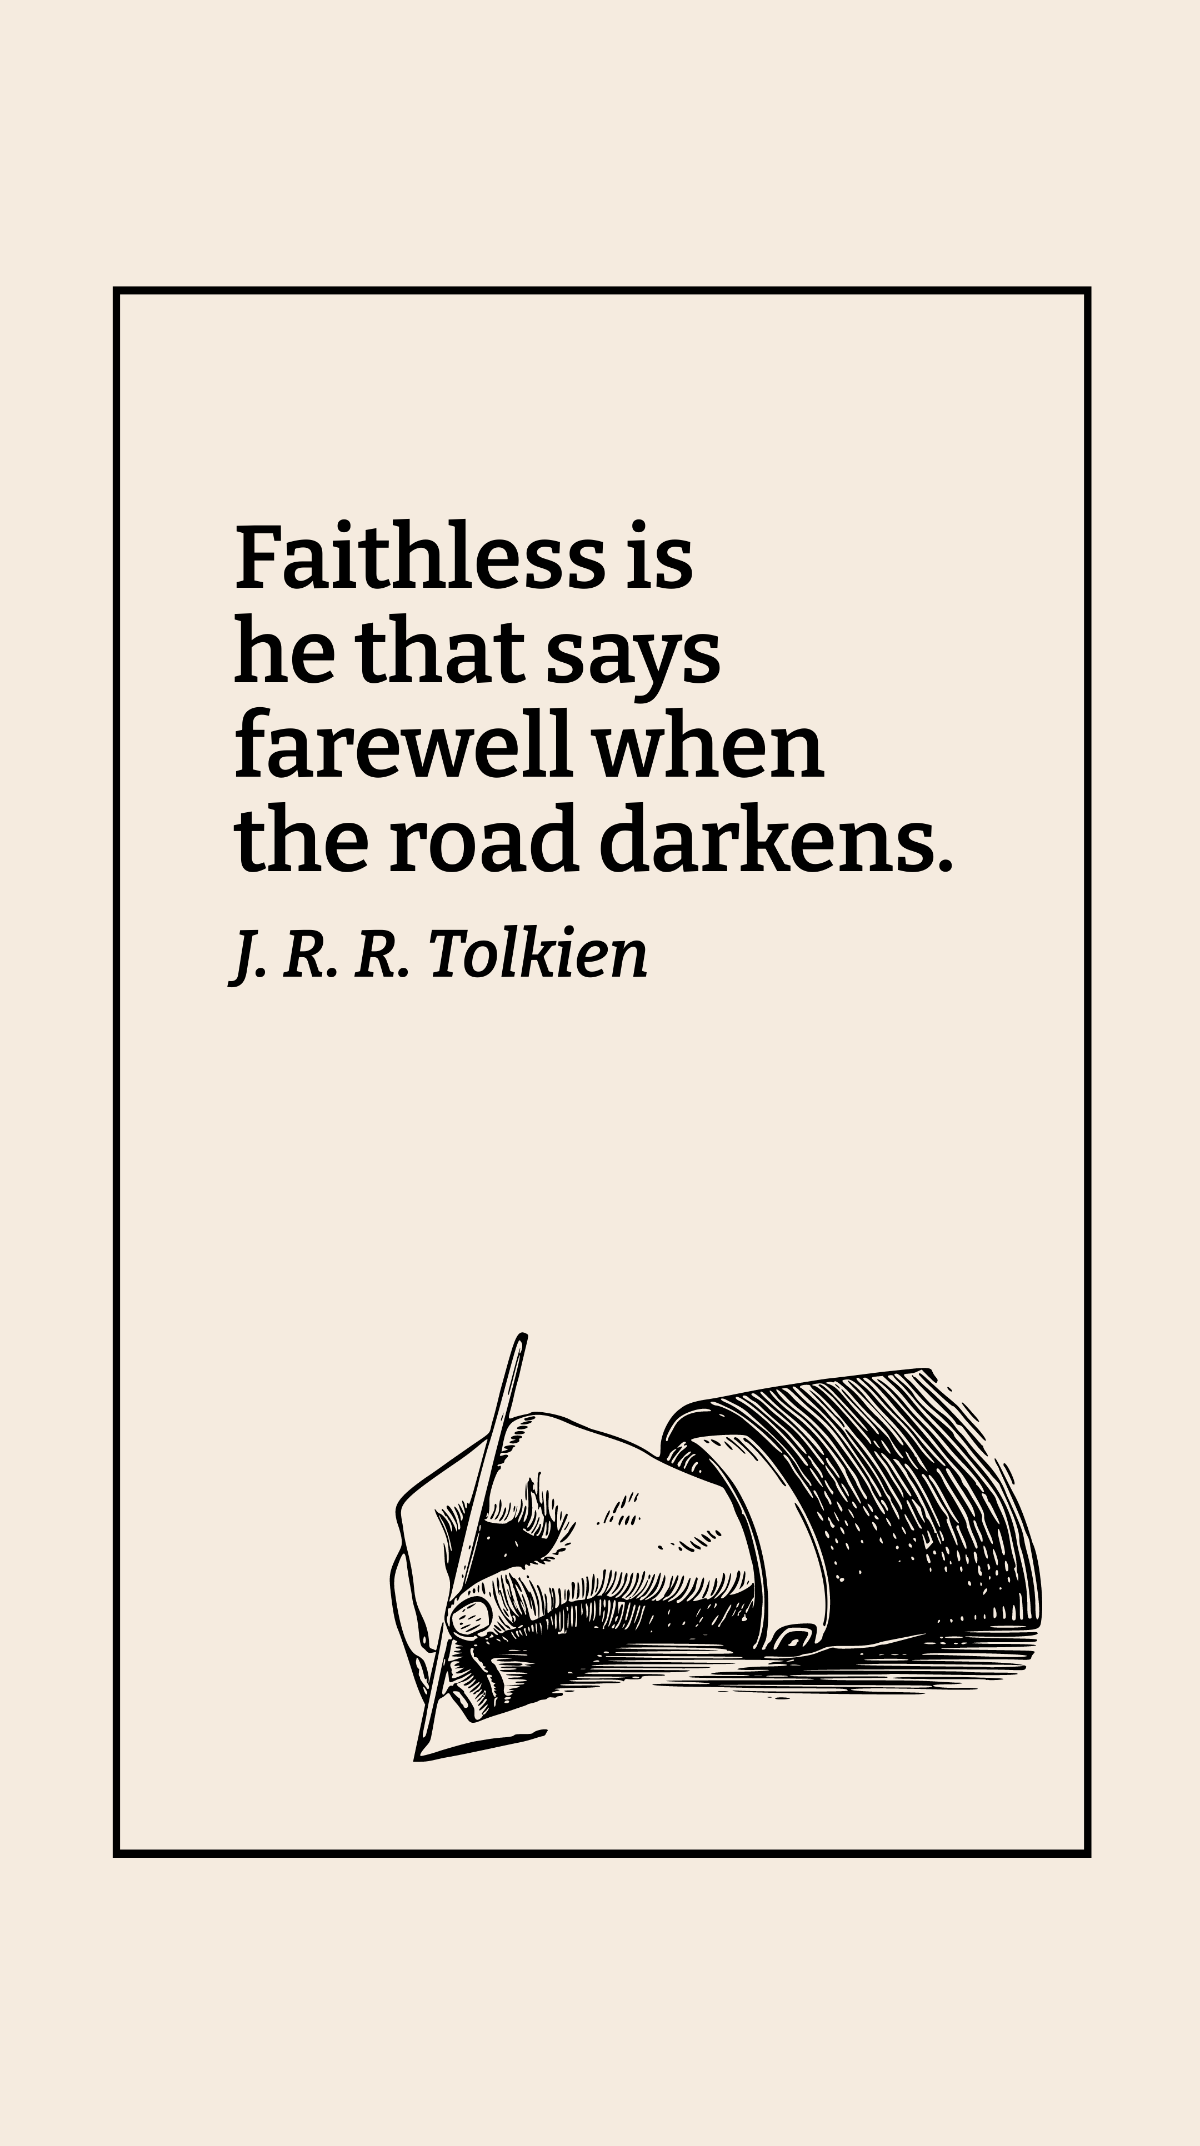 Free J. R. R. Tolkien - Faithless is he that says farewell when the road darkens. Template